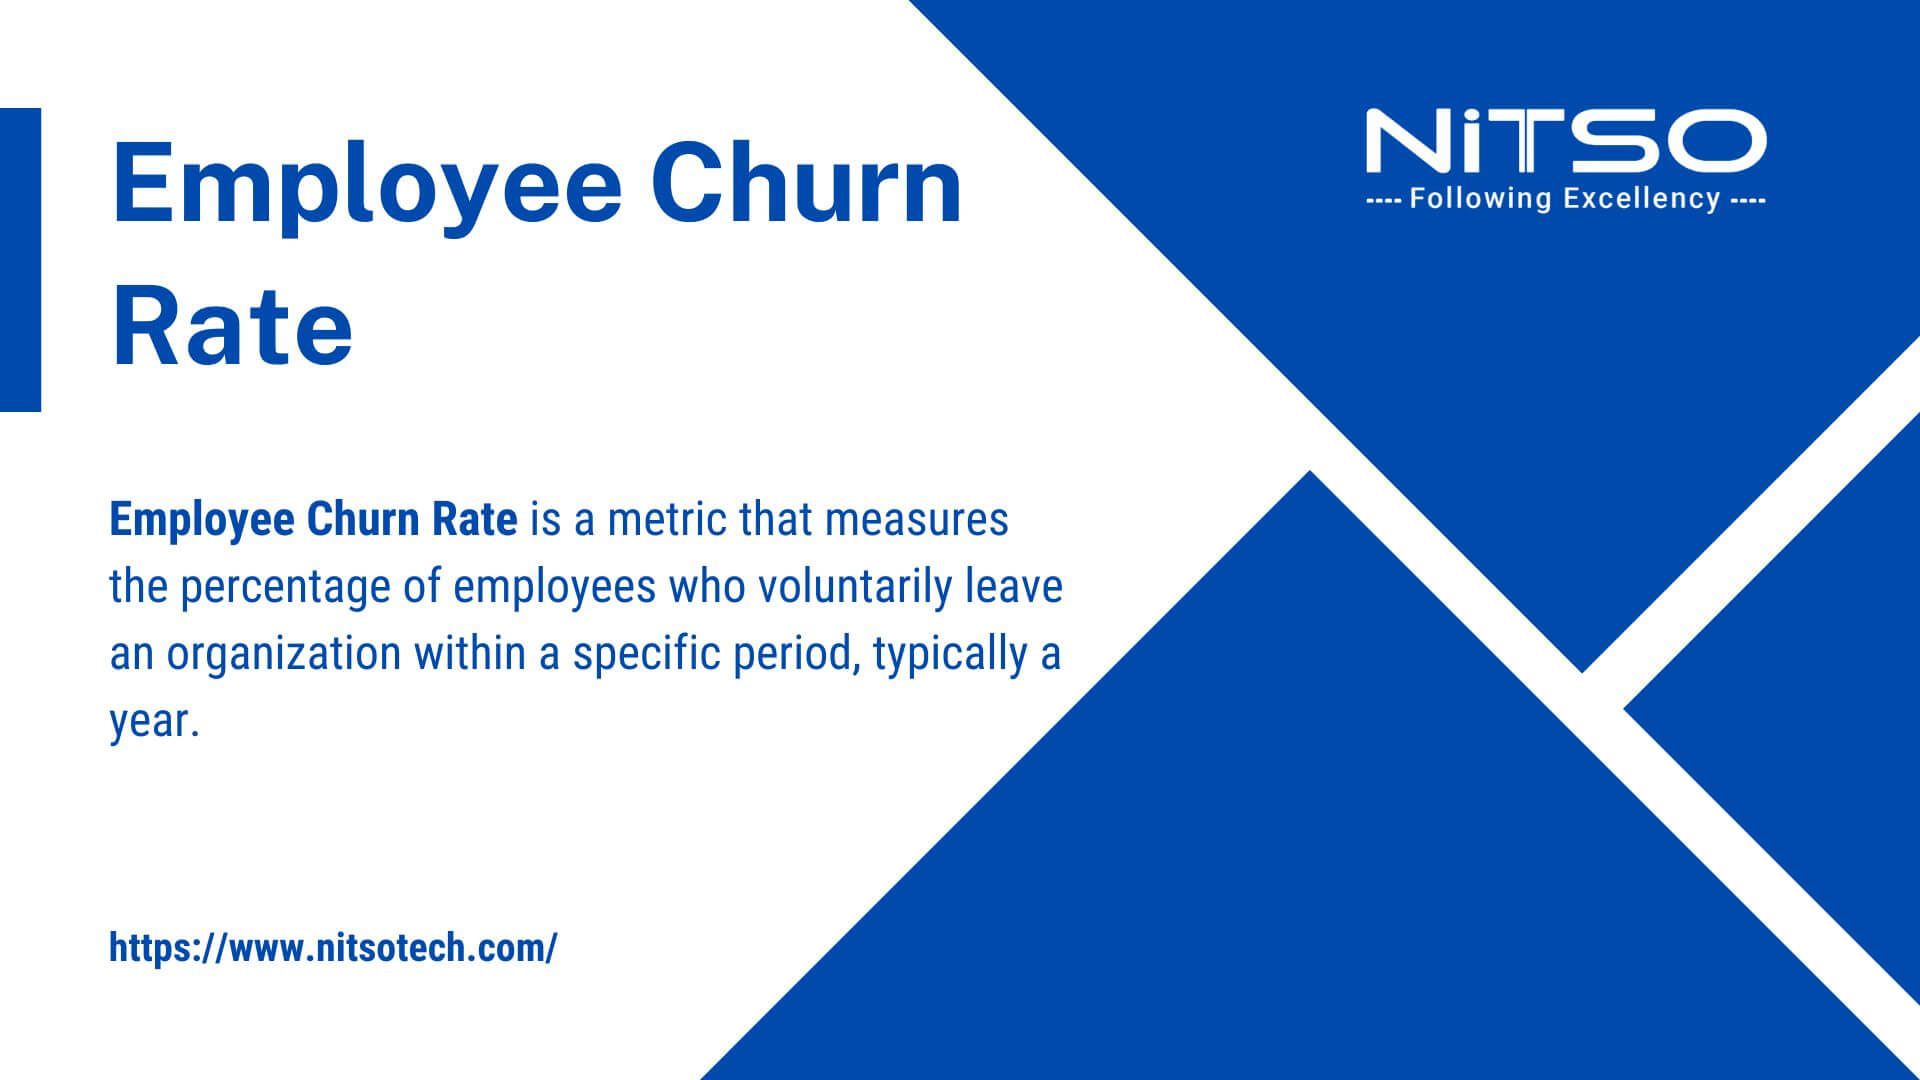 What is the Employee Churn Rate?